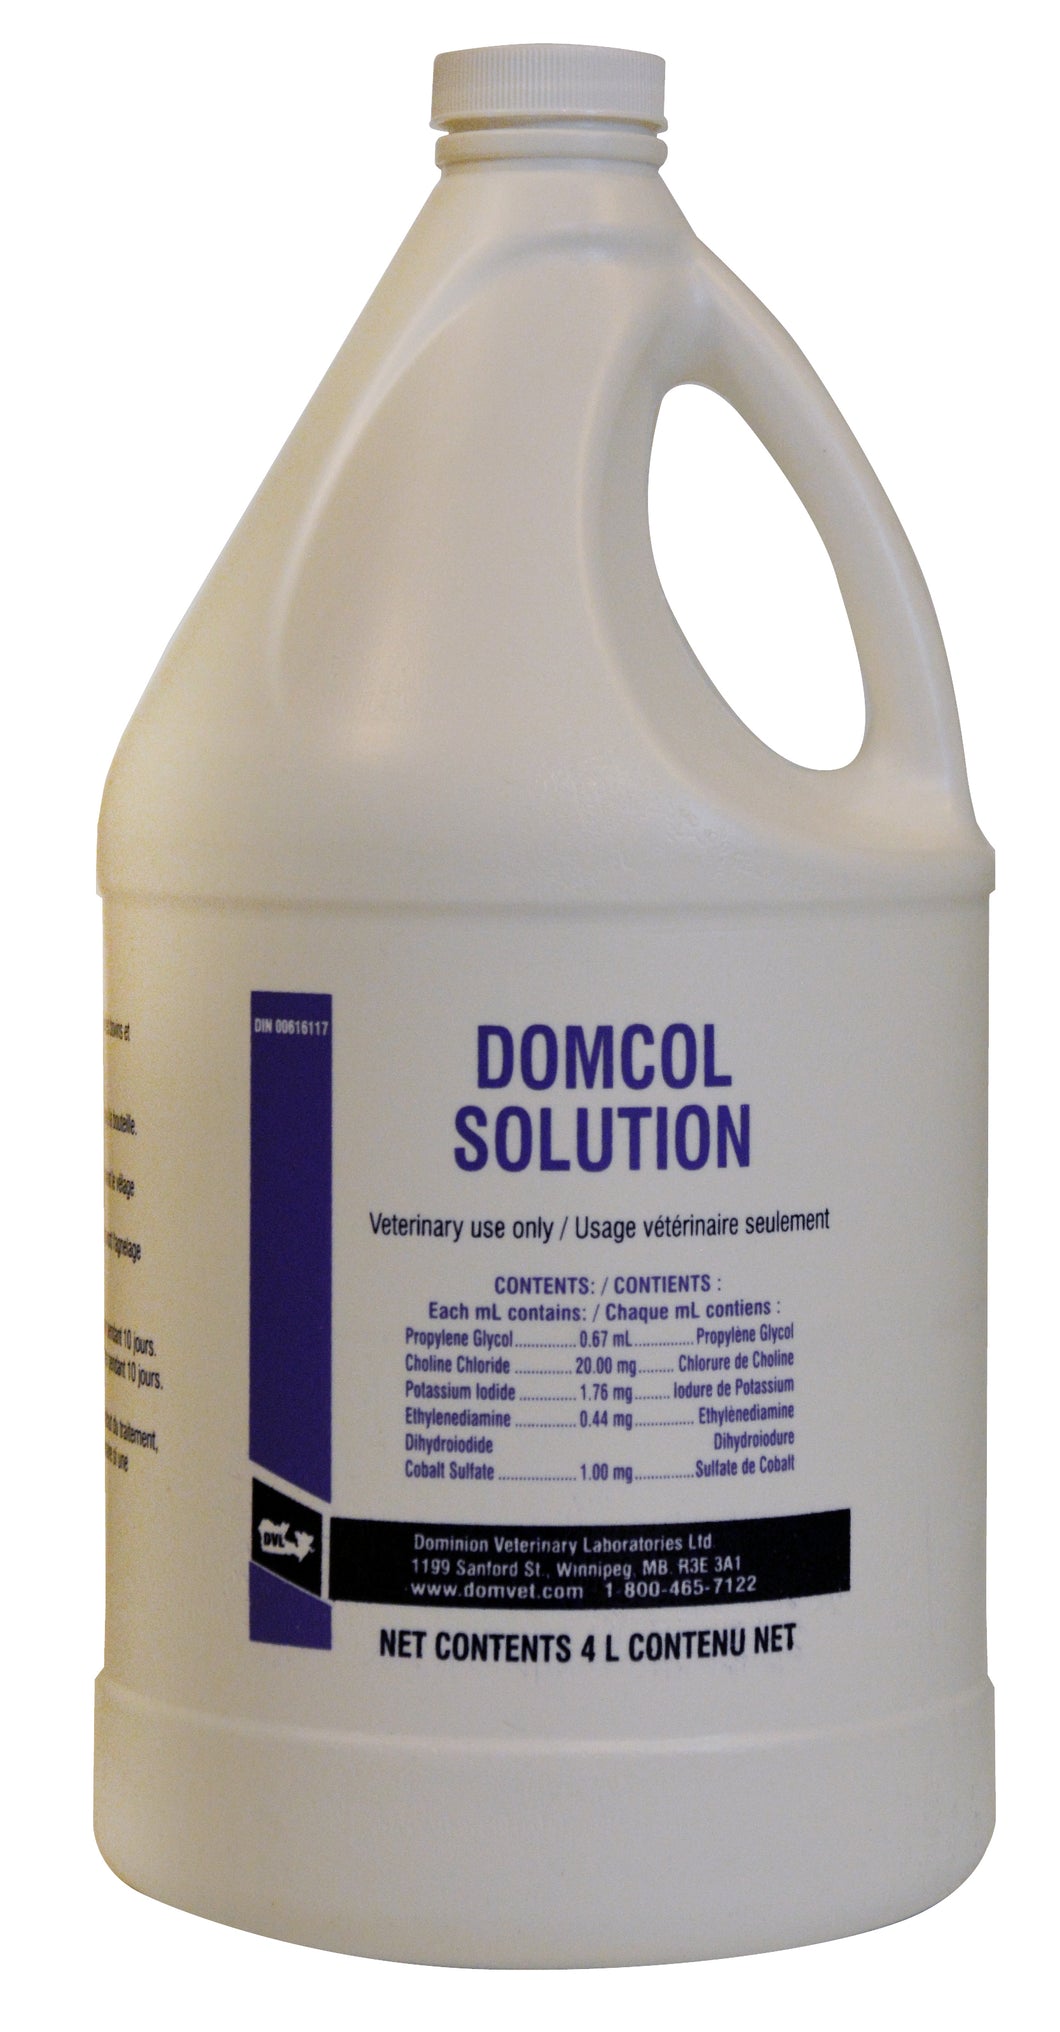 DOMCOL SOLUTION 4 L Cattle Supply treatment of acetonemia.